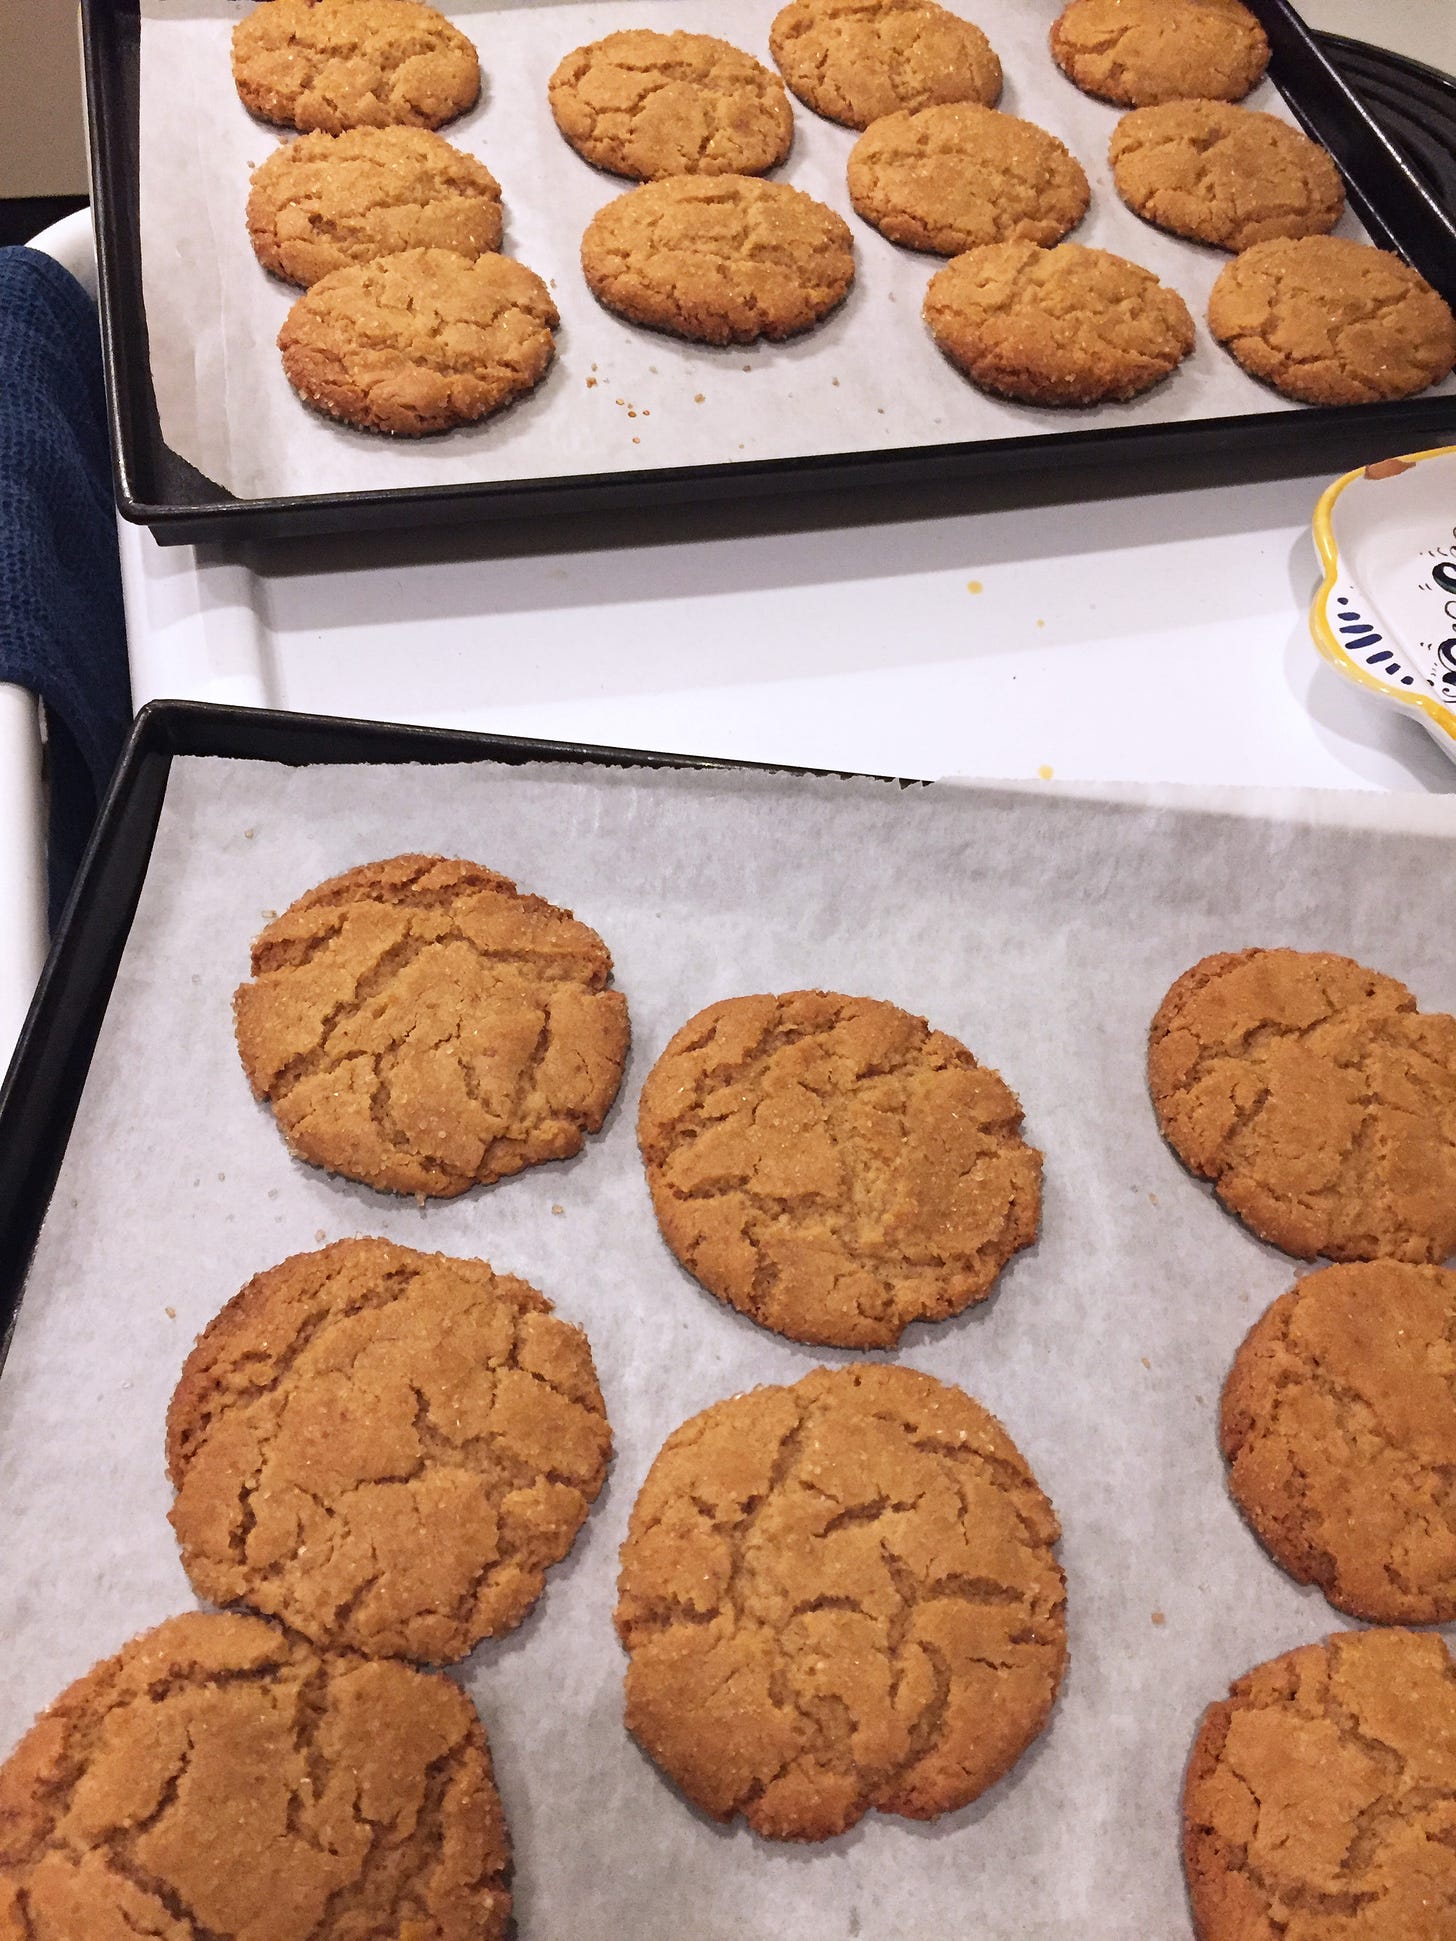 Two baking sheets of crinkly peanut butter cookies rest on top of a stove.